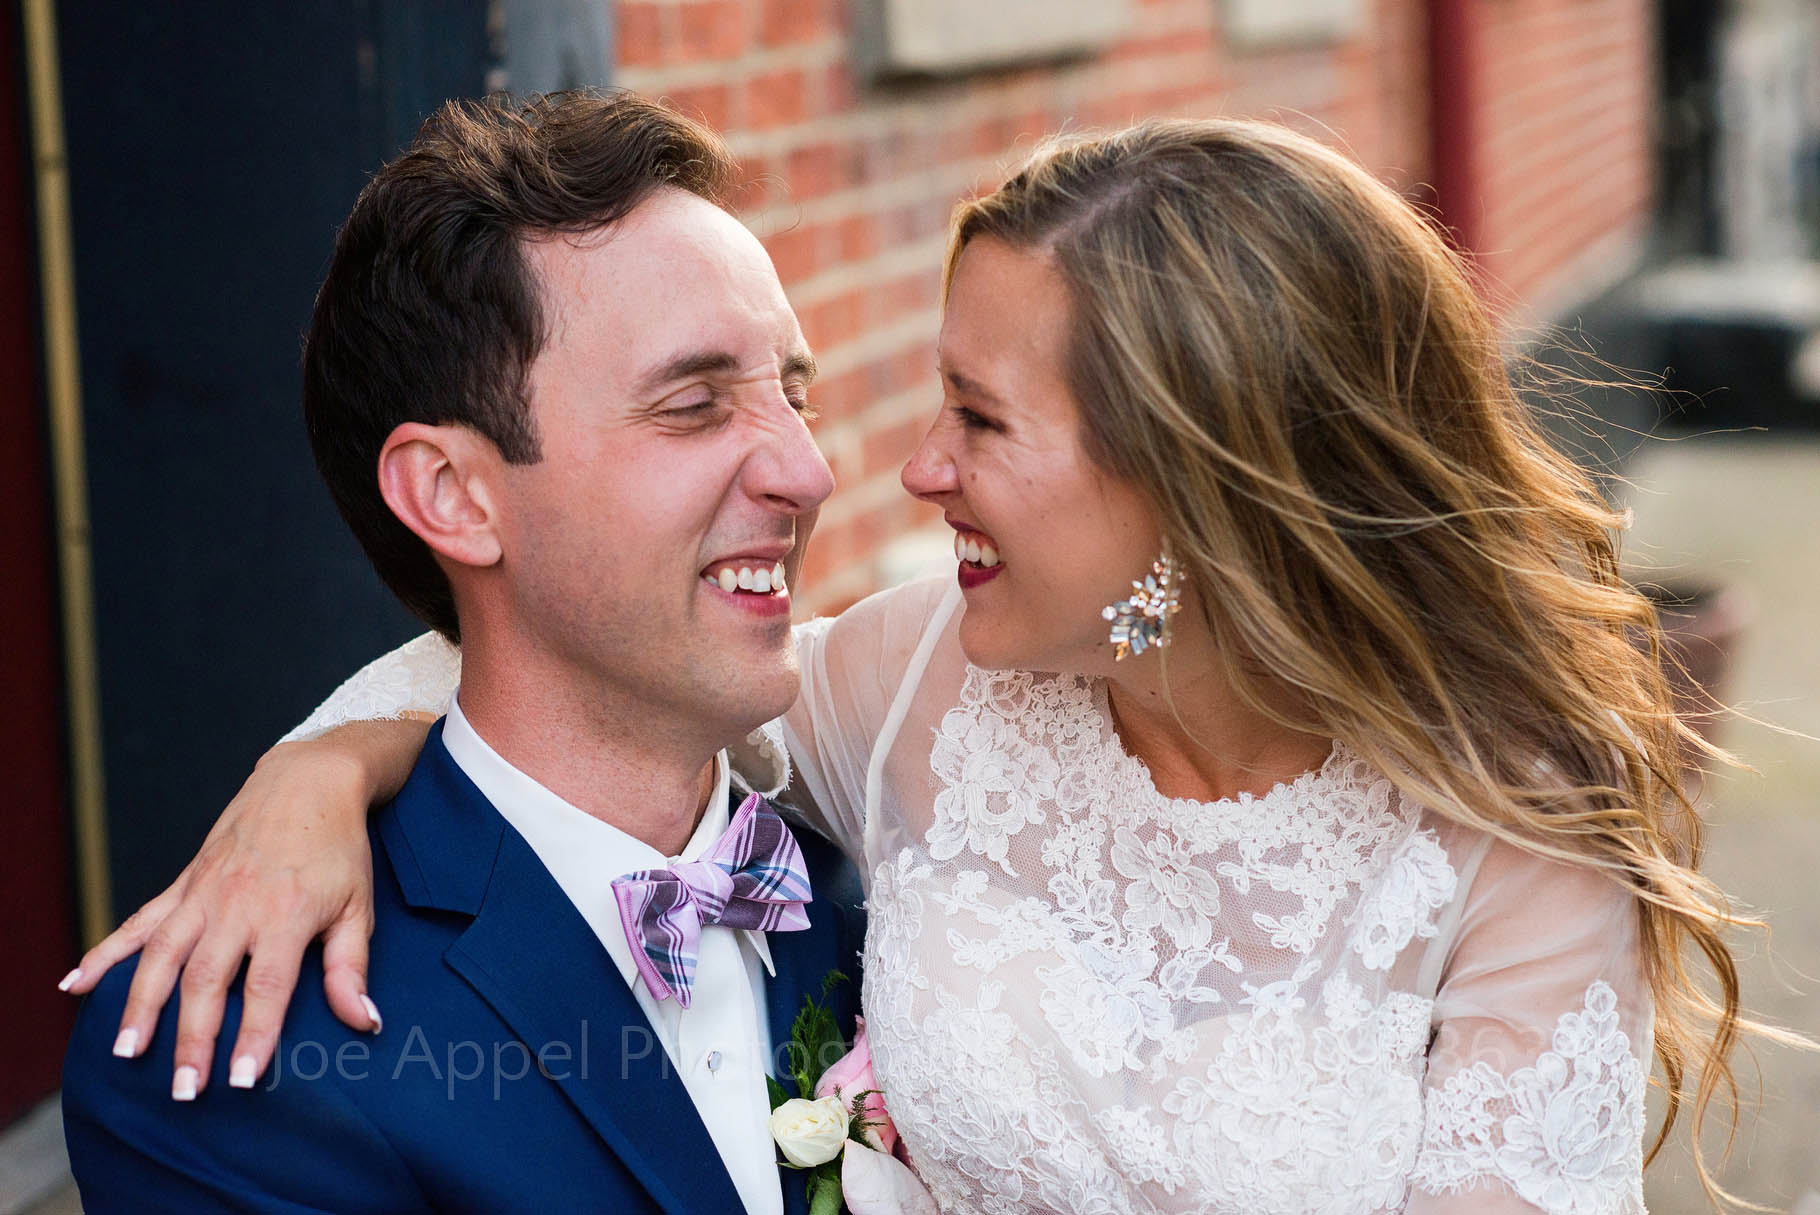 Young married couple look at each other and smile. Bride has her arm around the groom who is wearing a dark blue suit and a pink plaid bow tie.